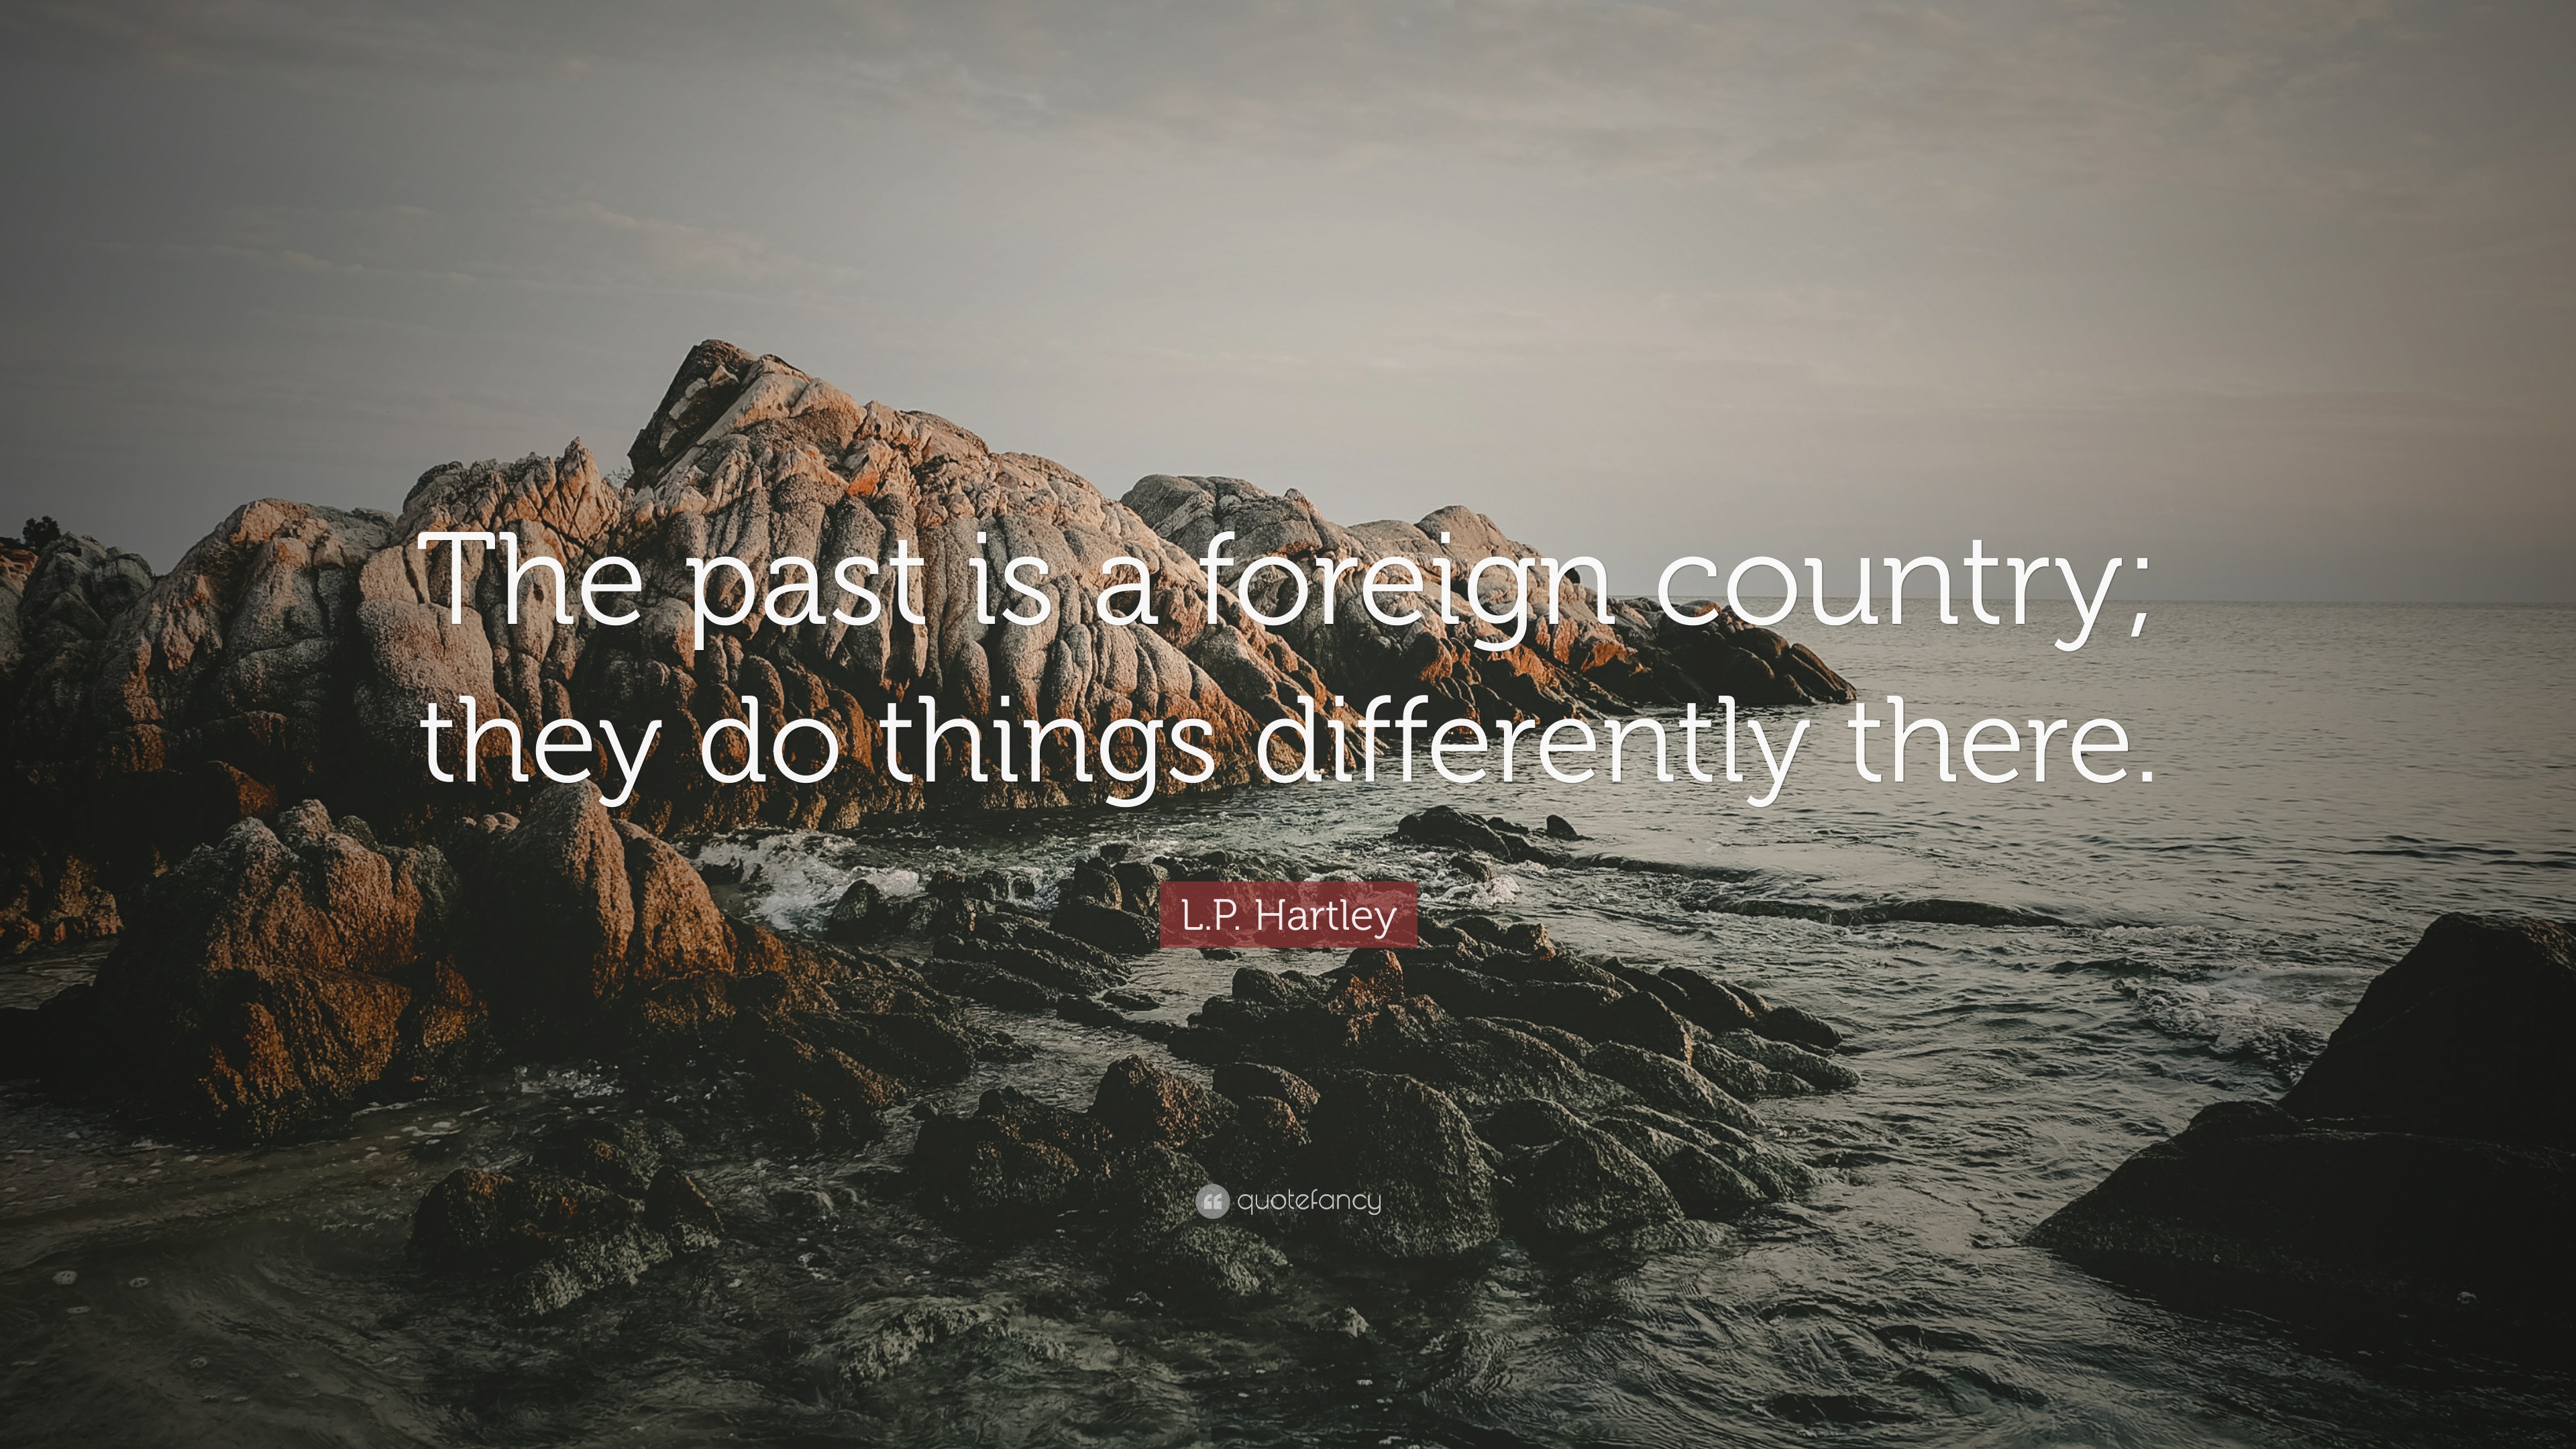 L.p. Hartley Quote: “The Past Is A Foreign Country; They Do Things Differently There.”